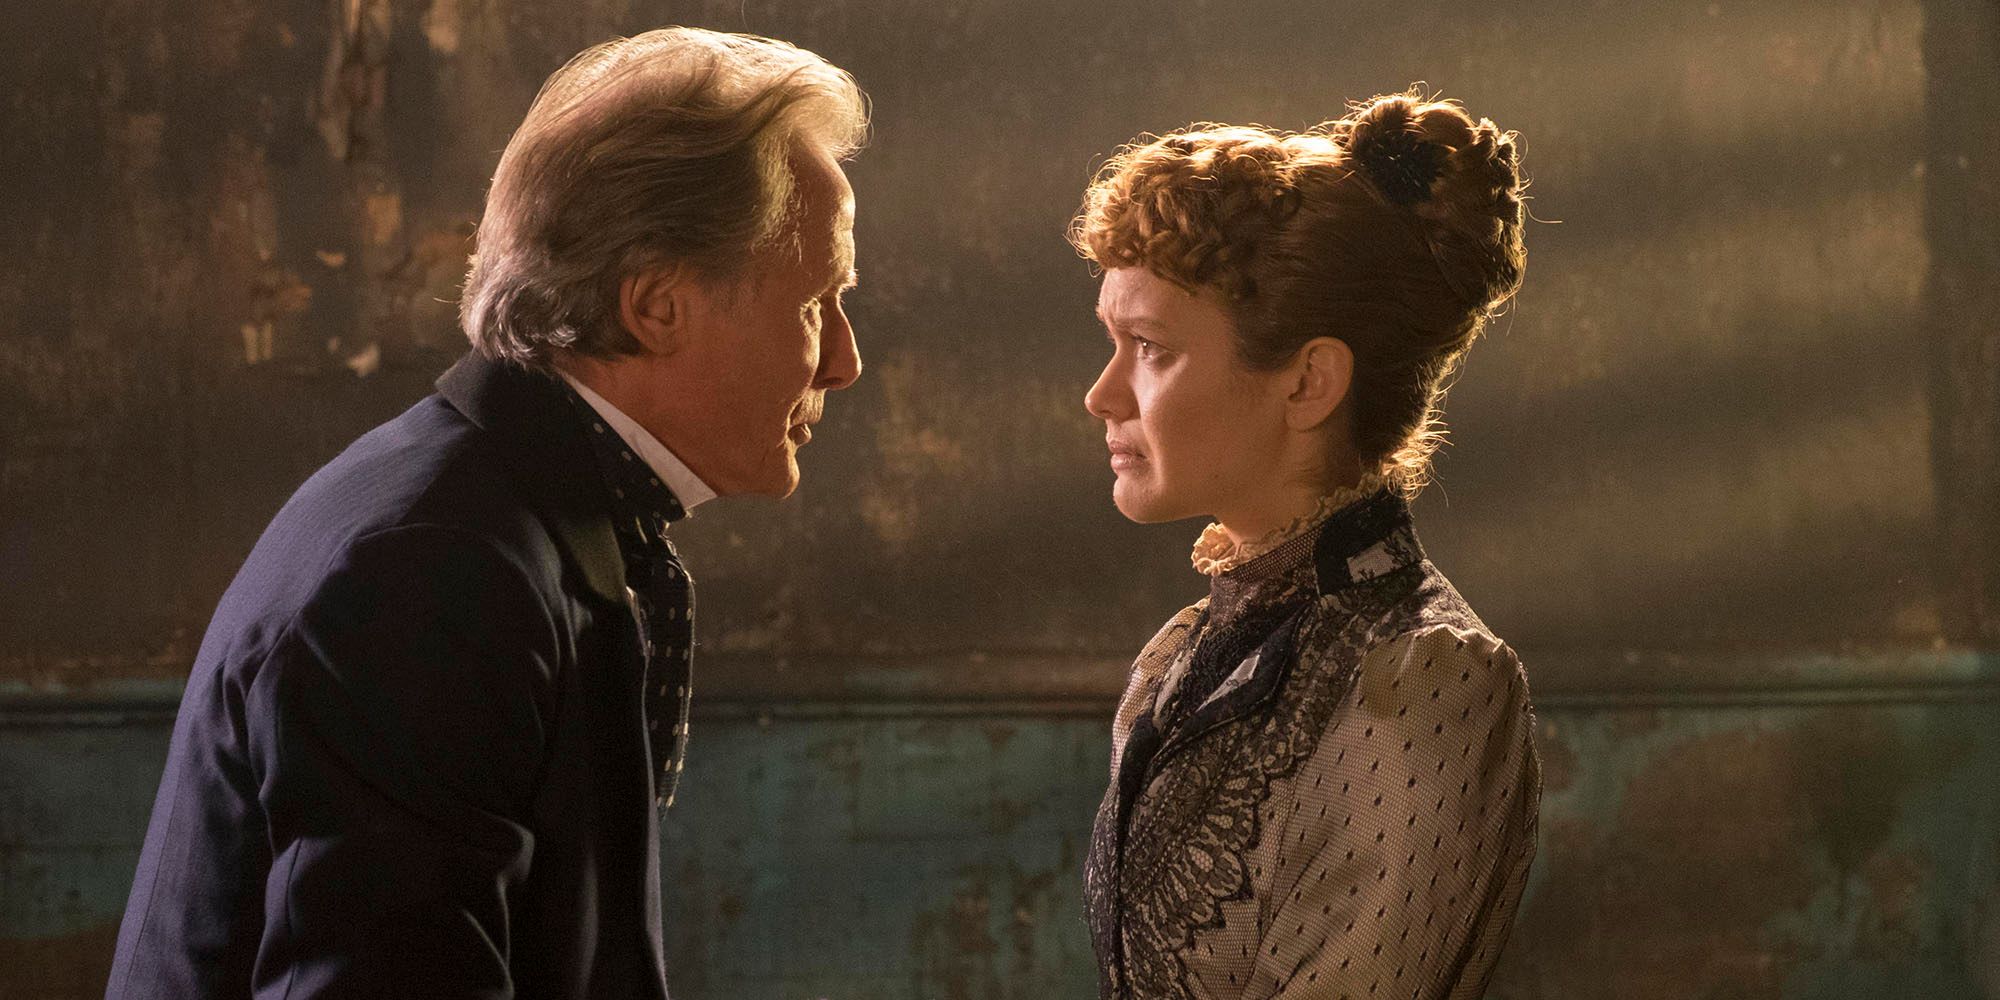 John Kildare confronts Lizzie Cree in The Limehouse Golem